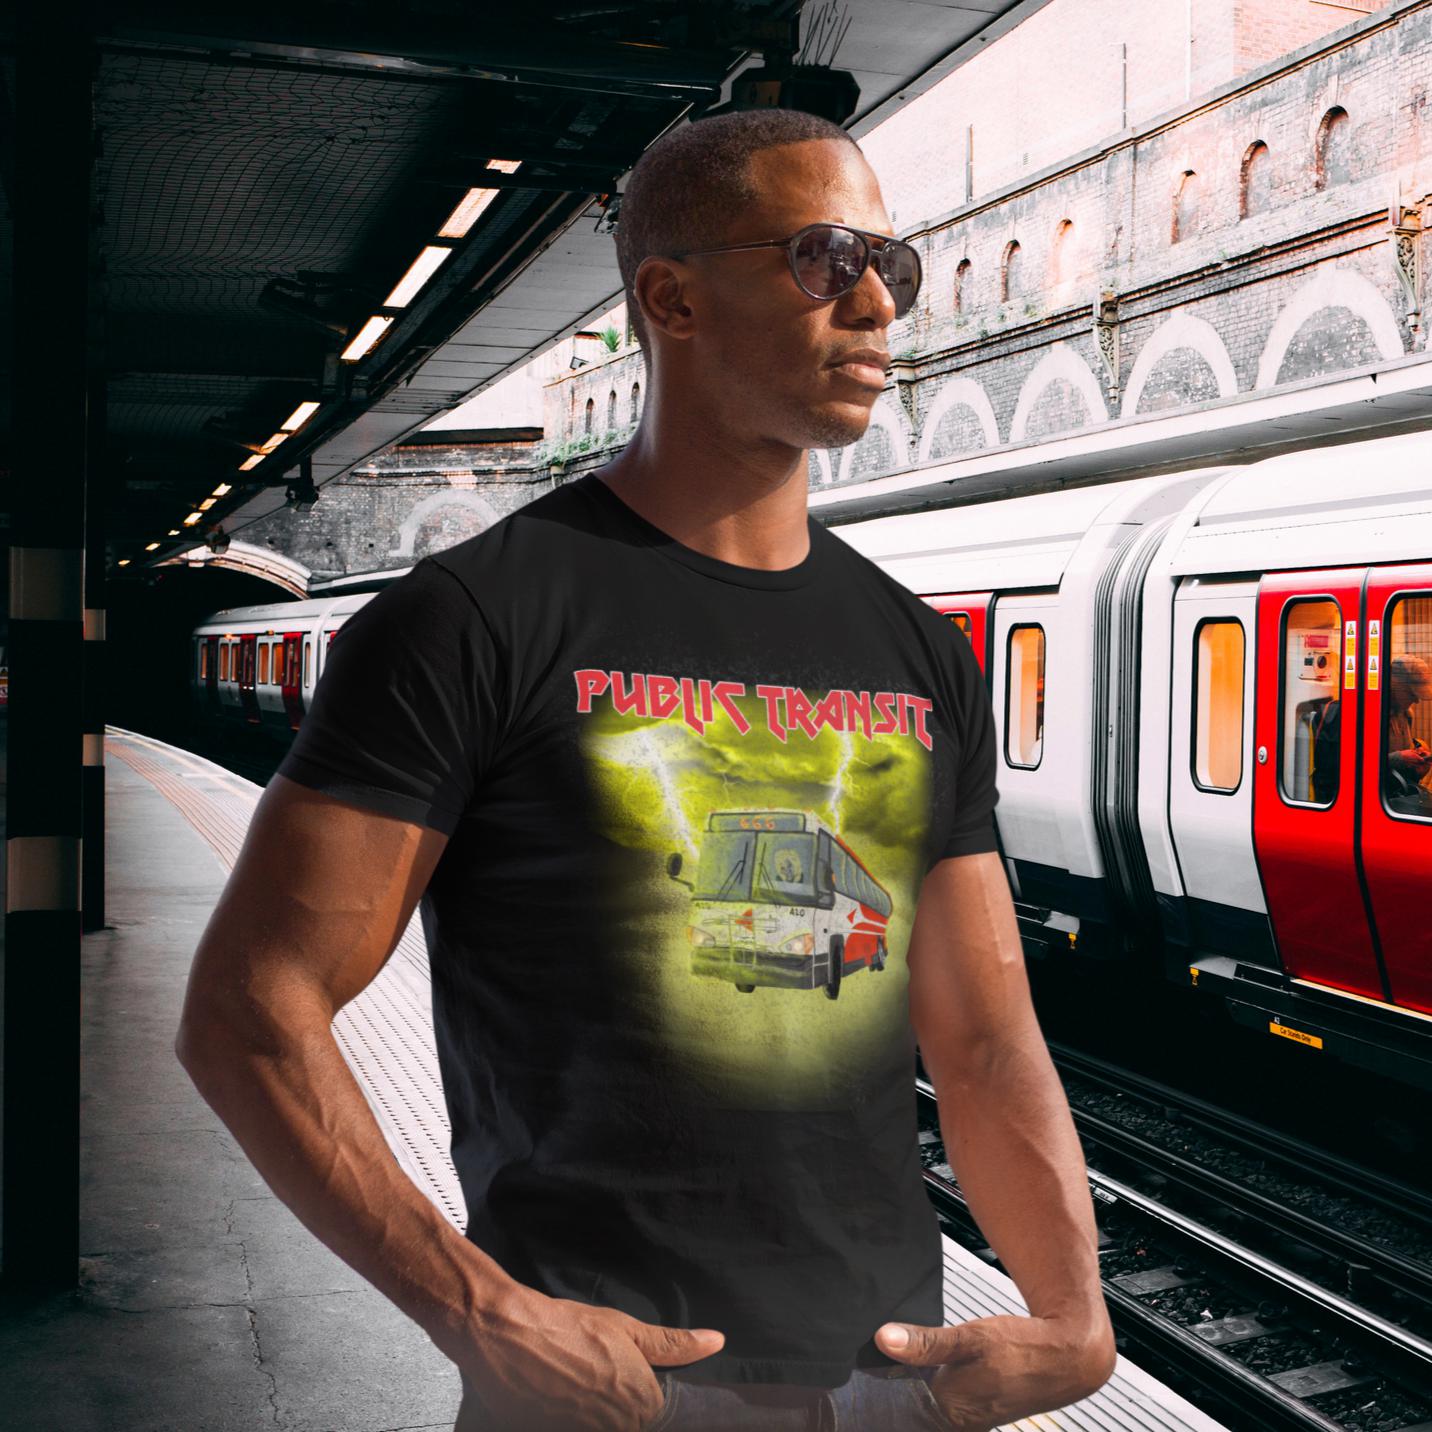 guy on train platform wearing black t-shirt with the words public transit in red metal band font and a red city bus with a skeleton driver and the route number 666 all surrounded by glowing yellow clouds and lightning